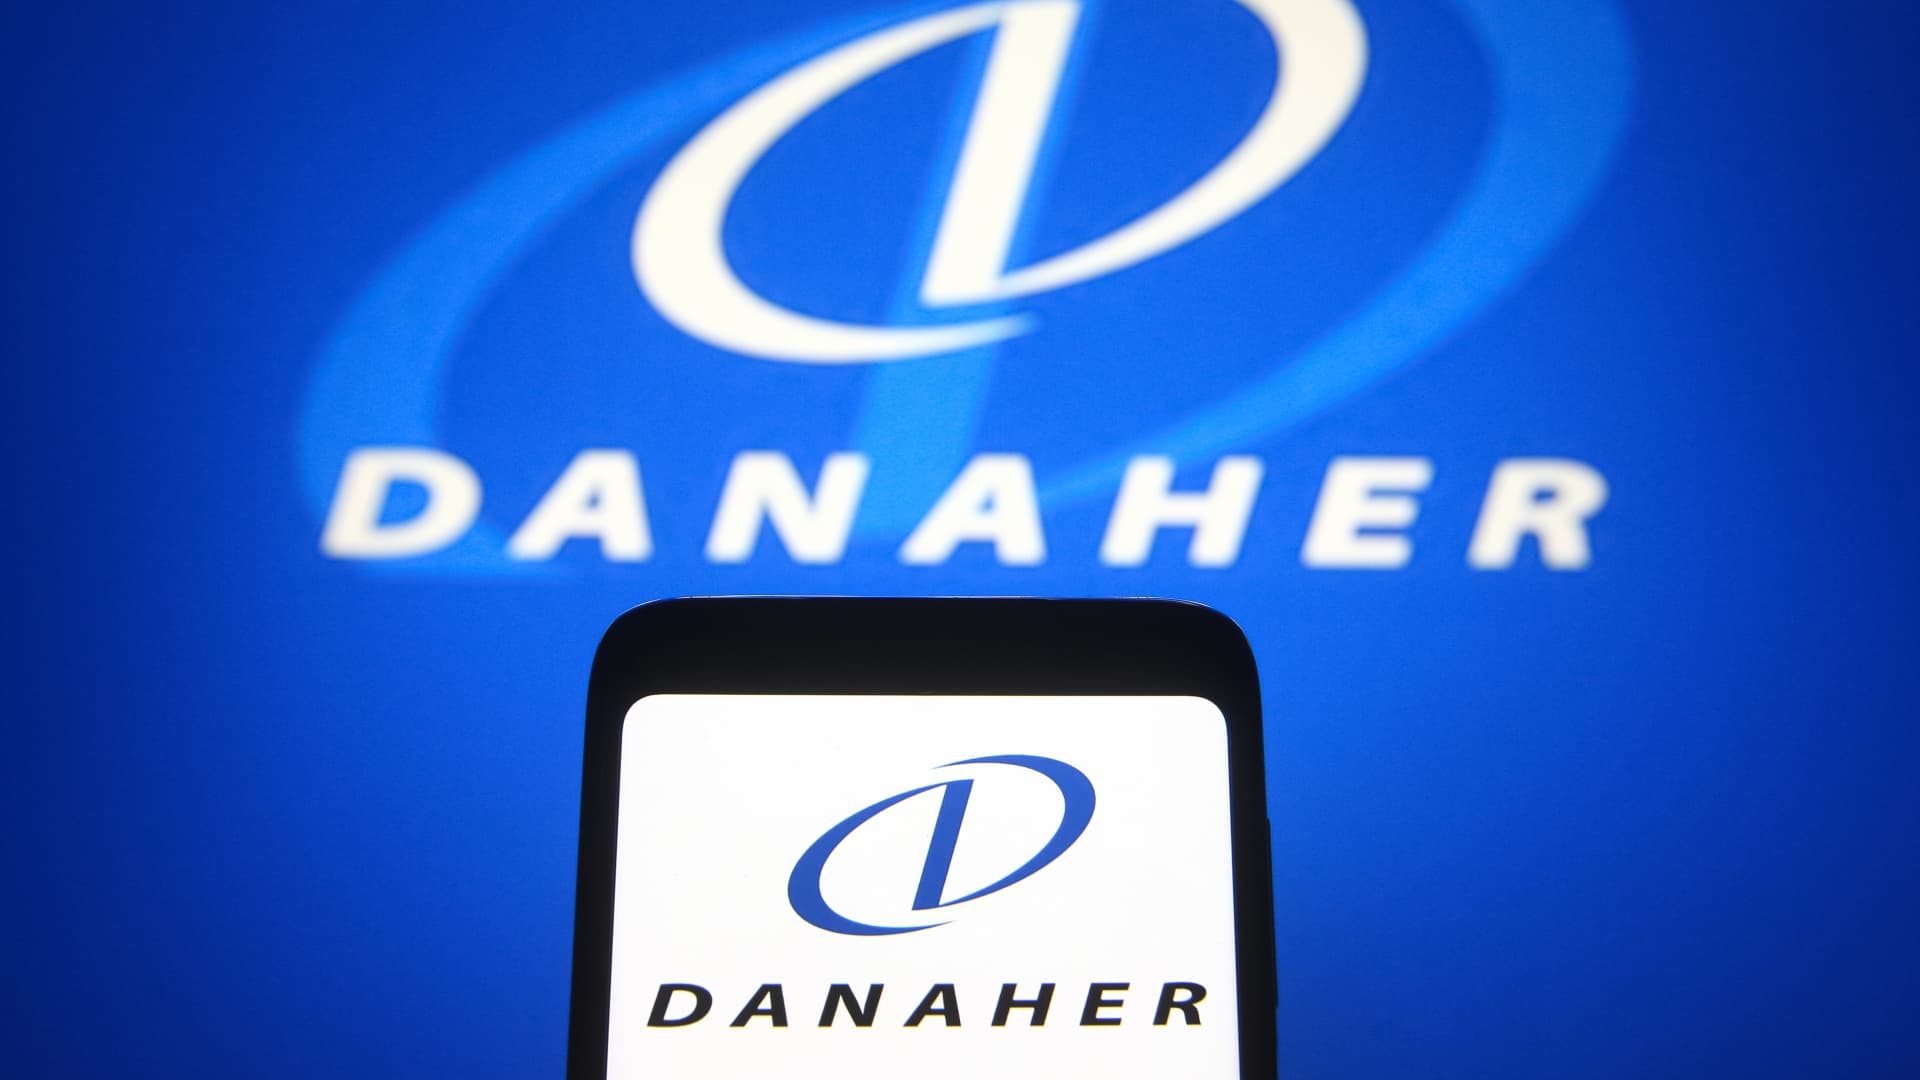 Jim Cramer says to buy shares of Danaher on the dip